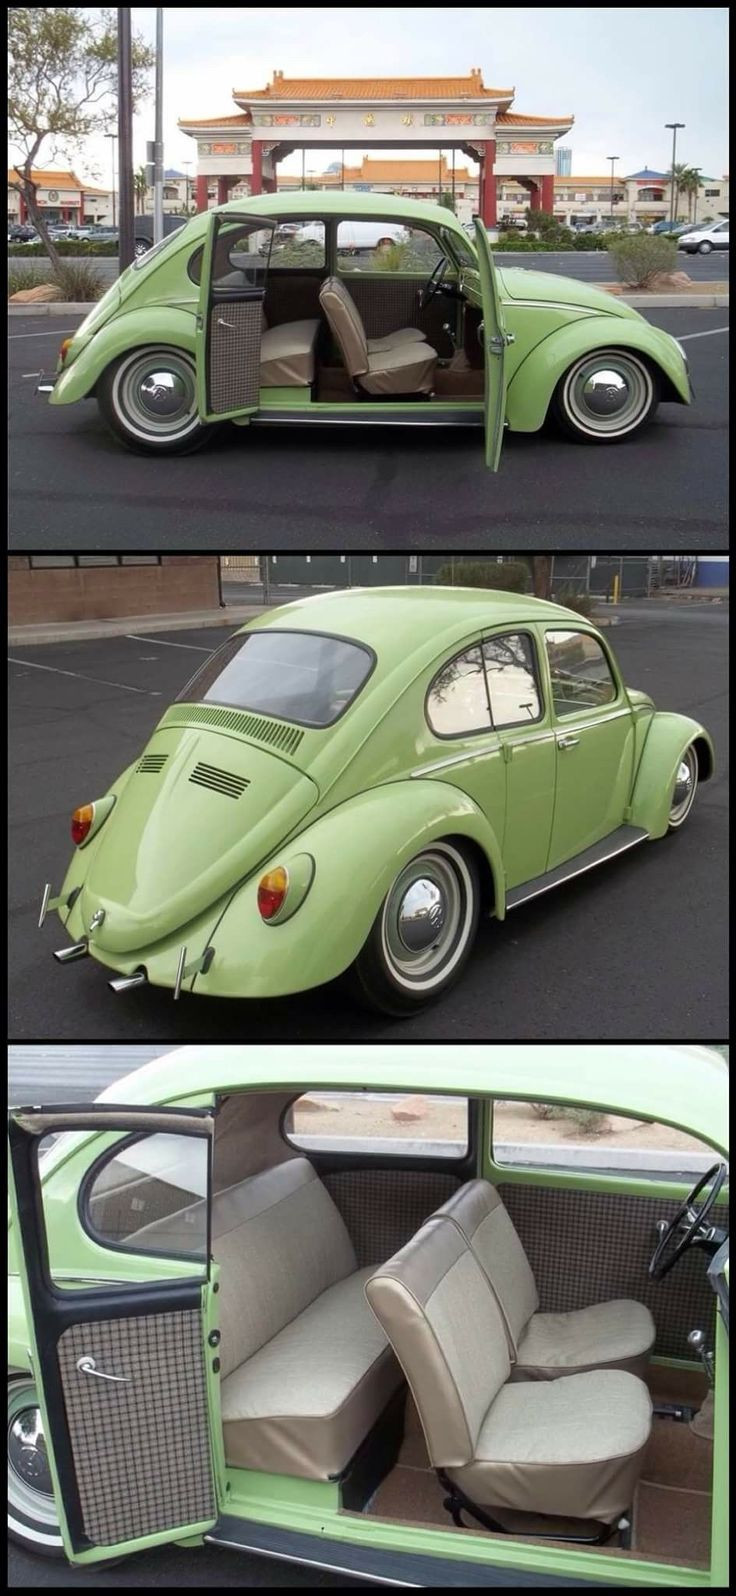 18 Stylish Volkswagen Beetle Vase 2024 free download volkswagen beetle vase of 252 best vw beetleac29dc2a4 and vw buss images on pinterest vw beetles intended for find this pin and more on vw beetleac29dc2a4 and vw buss by vaipi